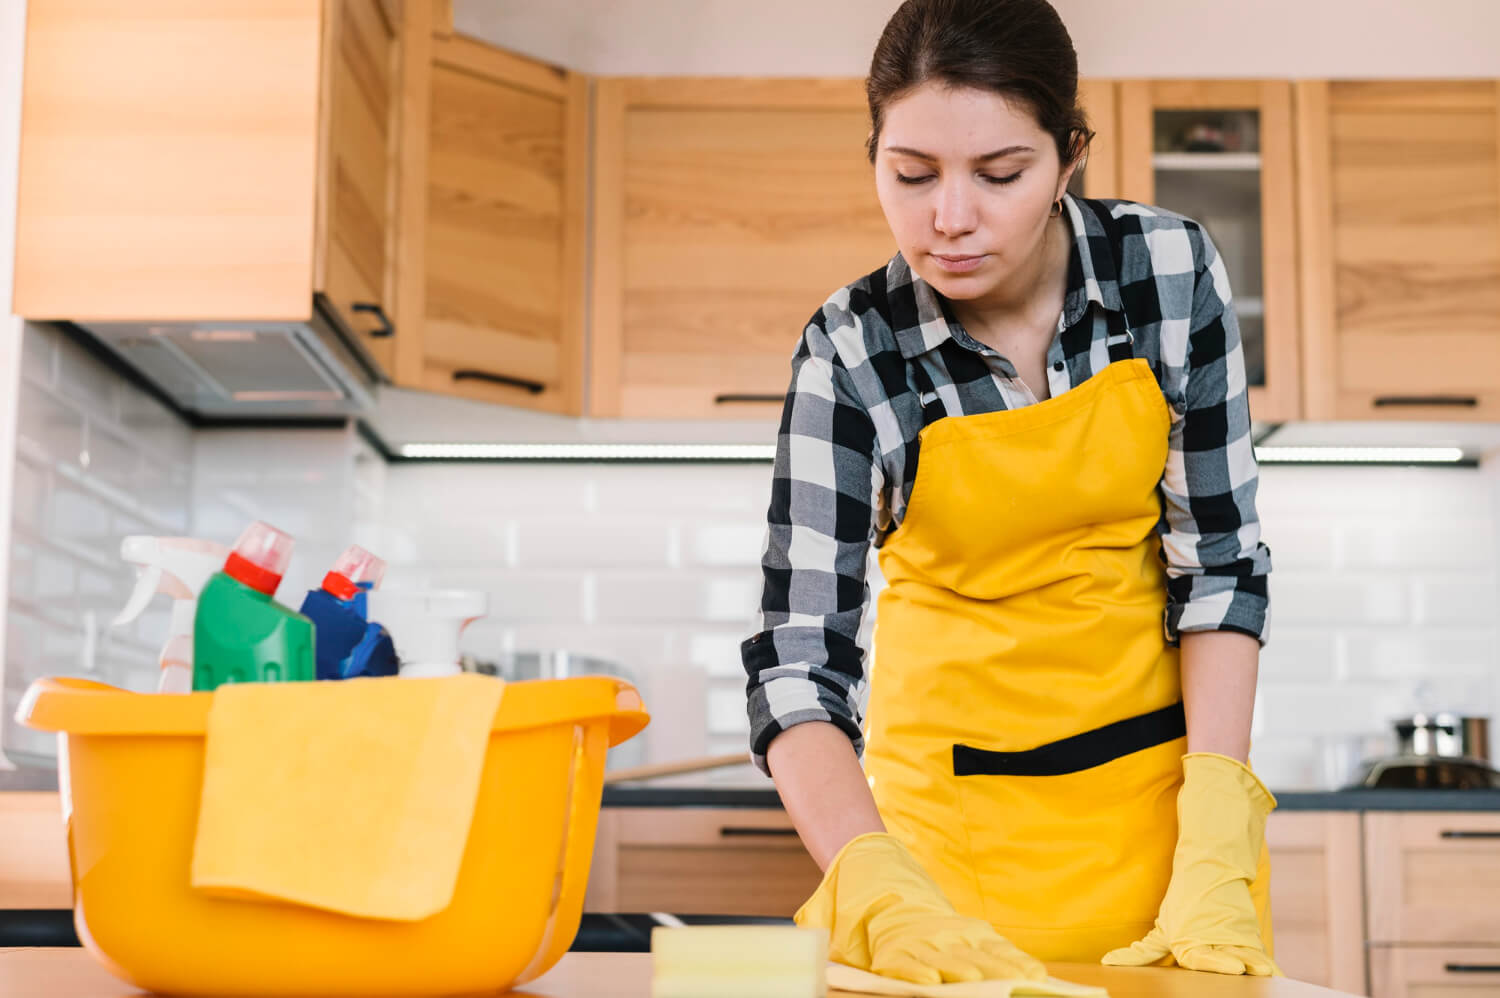 close up female woman in yellow uniform cleaning kitchen table with bucket with cleaning products and supplies next to her